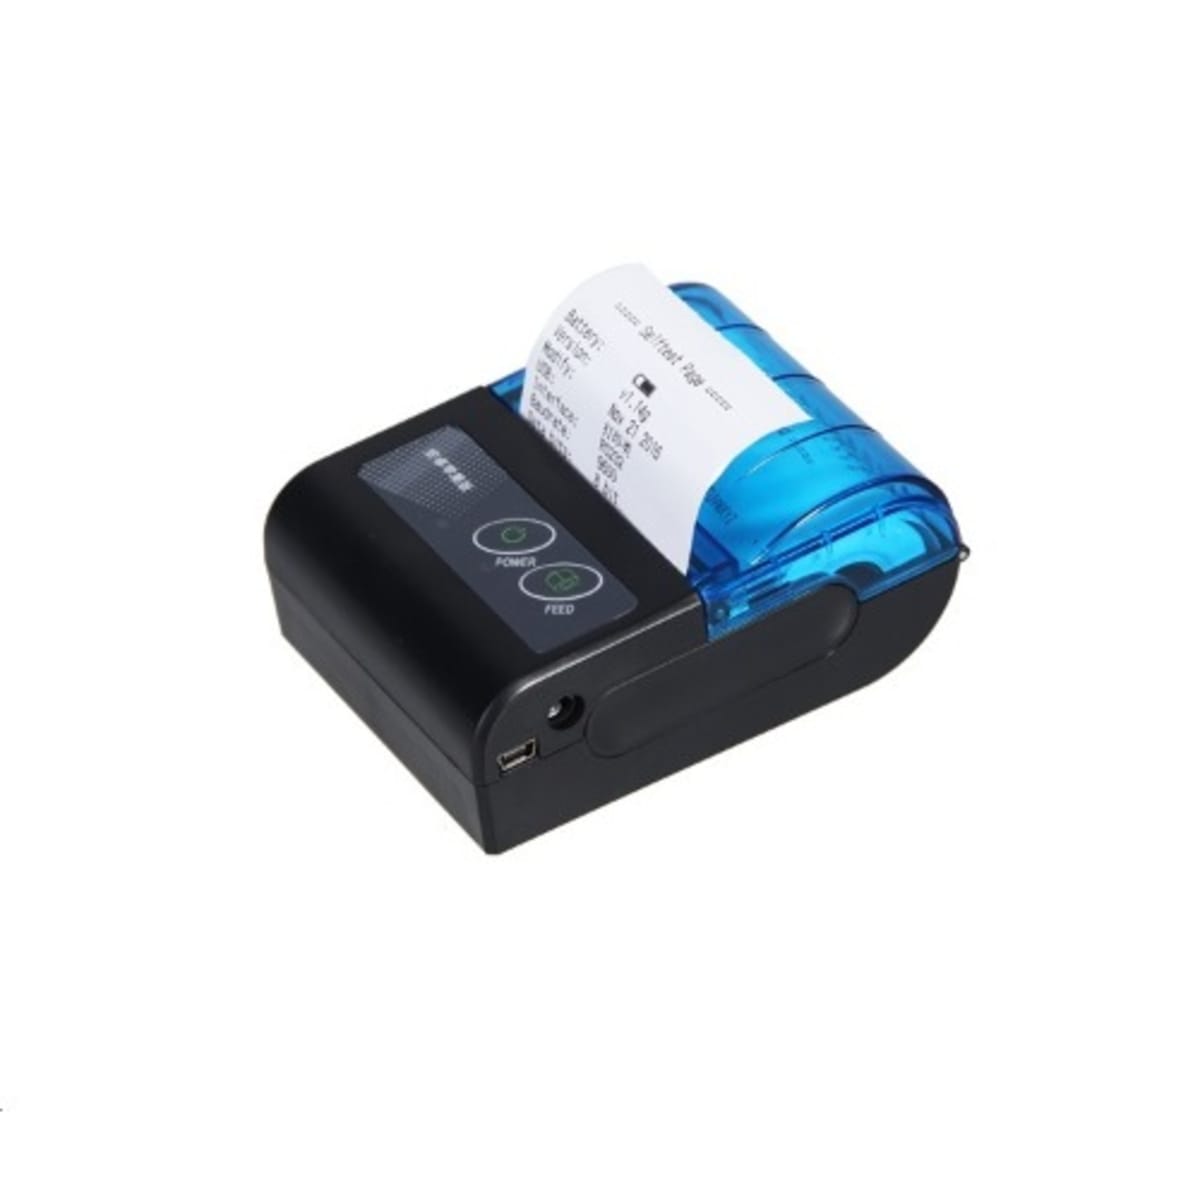 Mpt-ii Portable Android Bluetooth Thermal Printer | Online